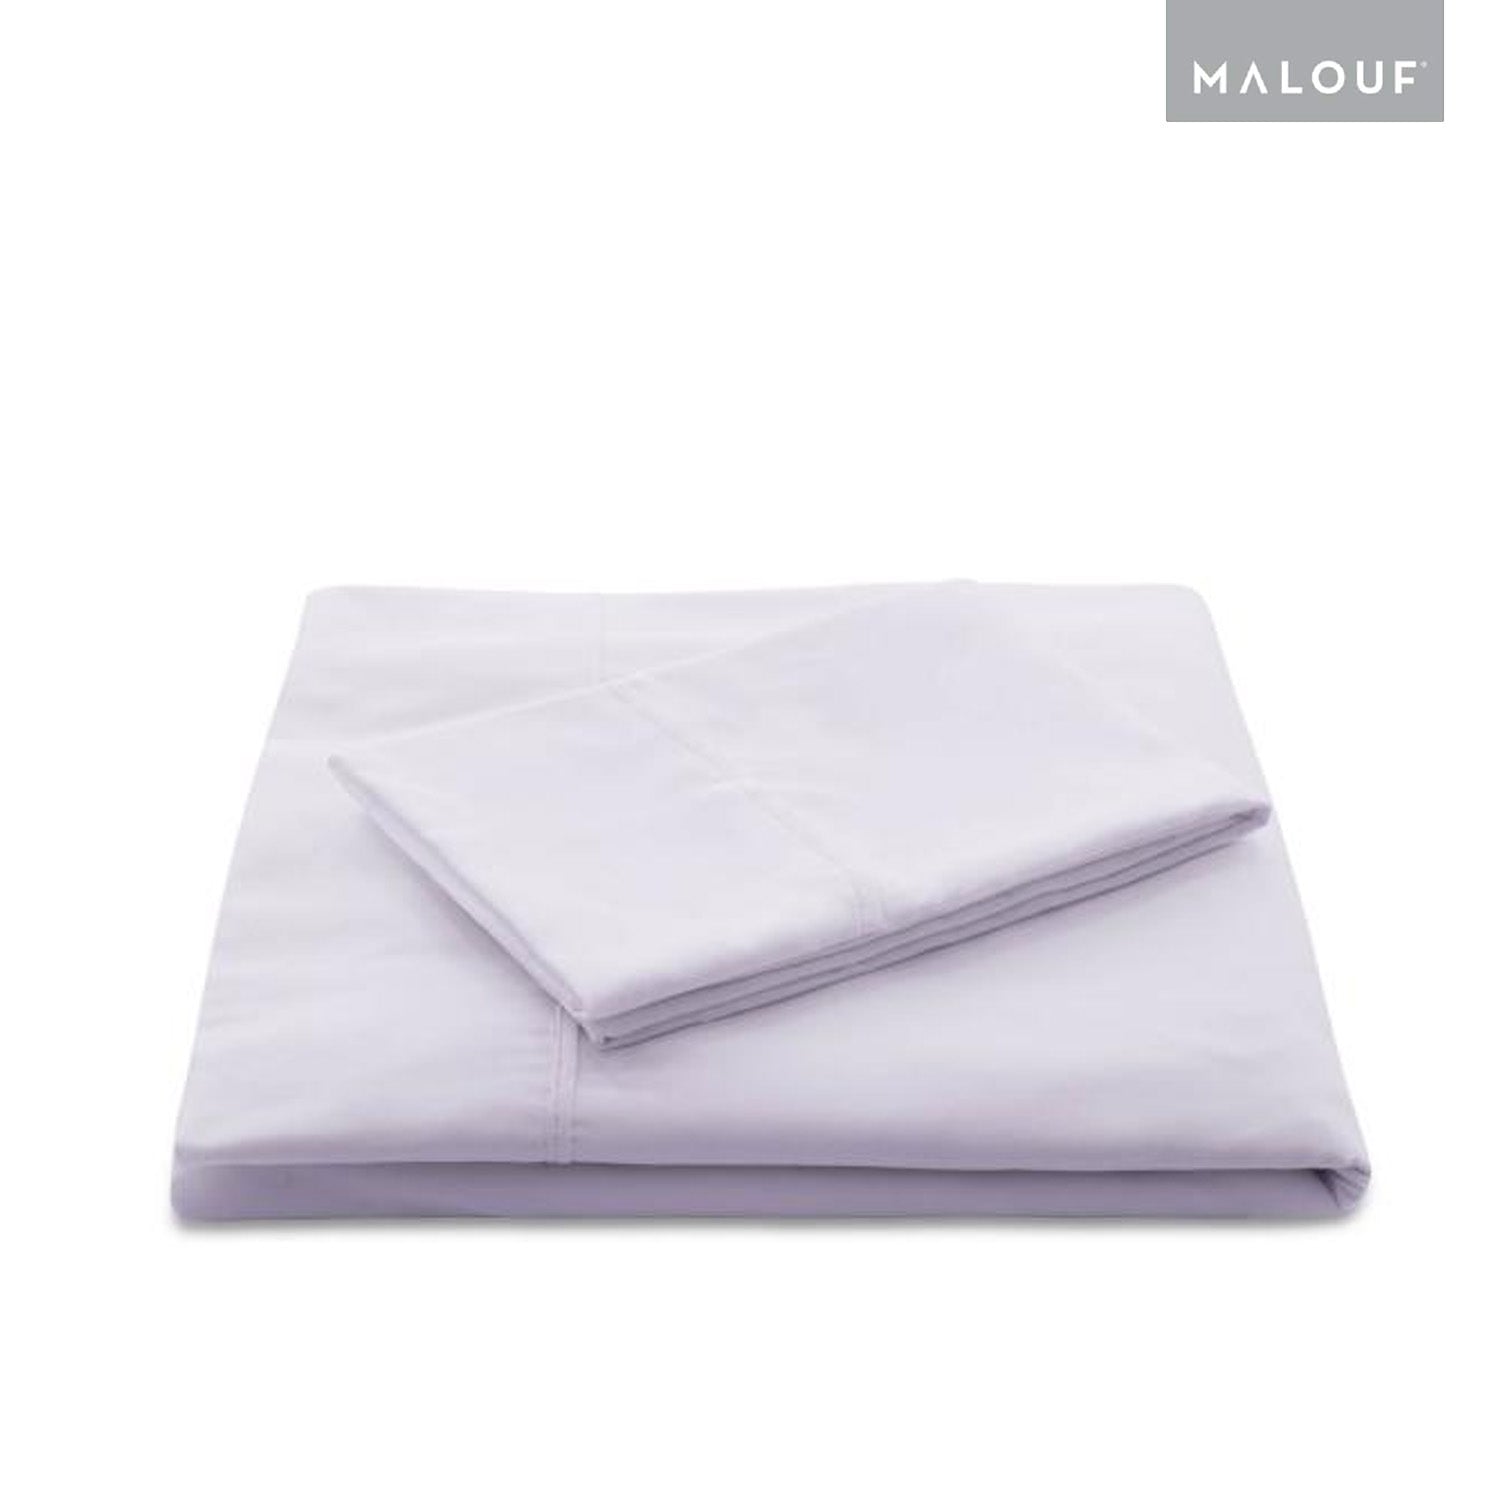 Malouf Woven Brushed Microfiber Bed Sheets